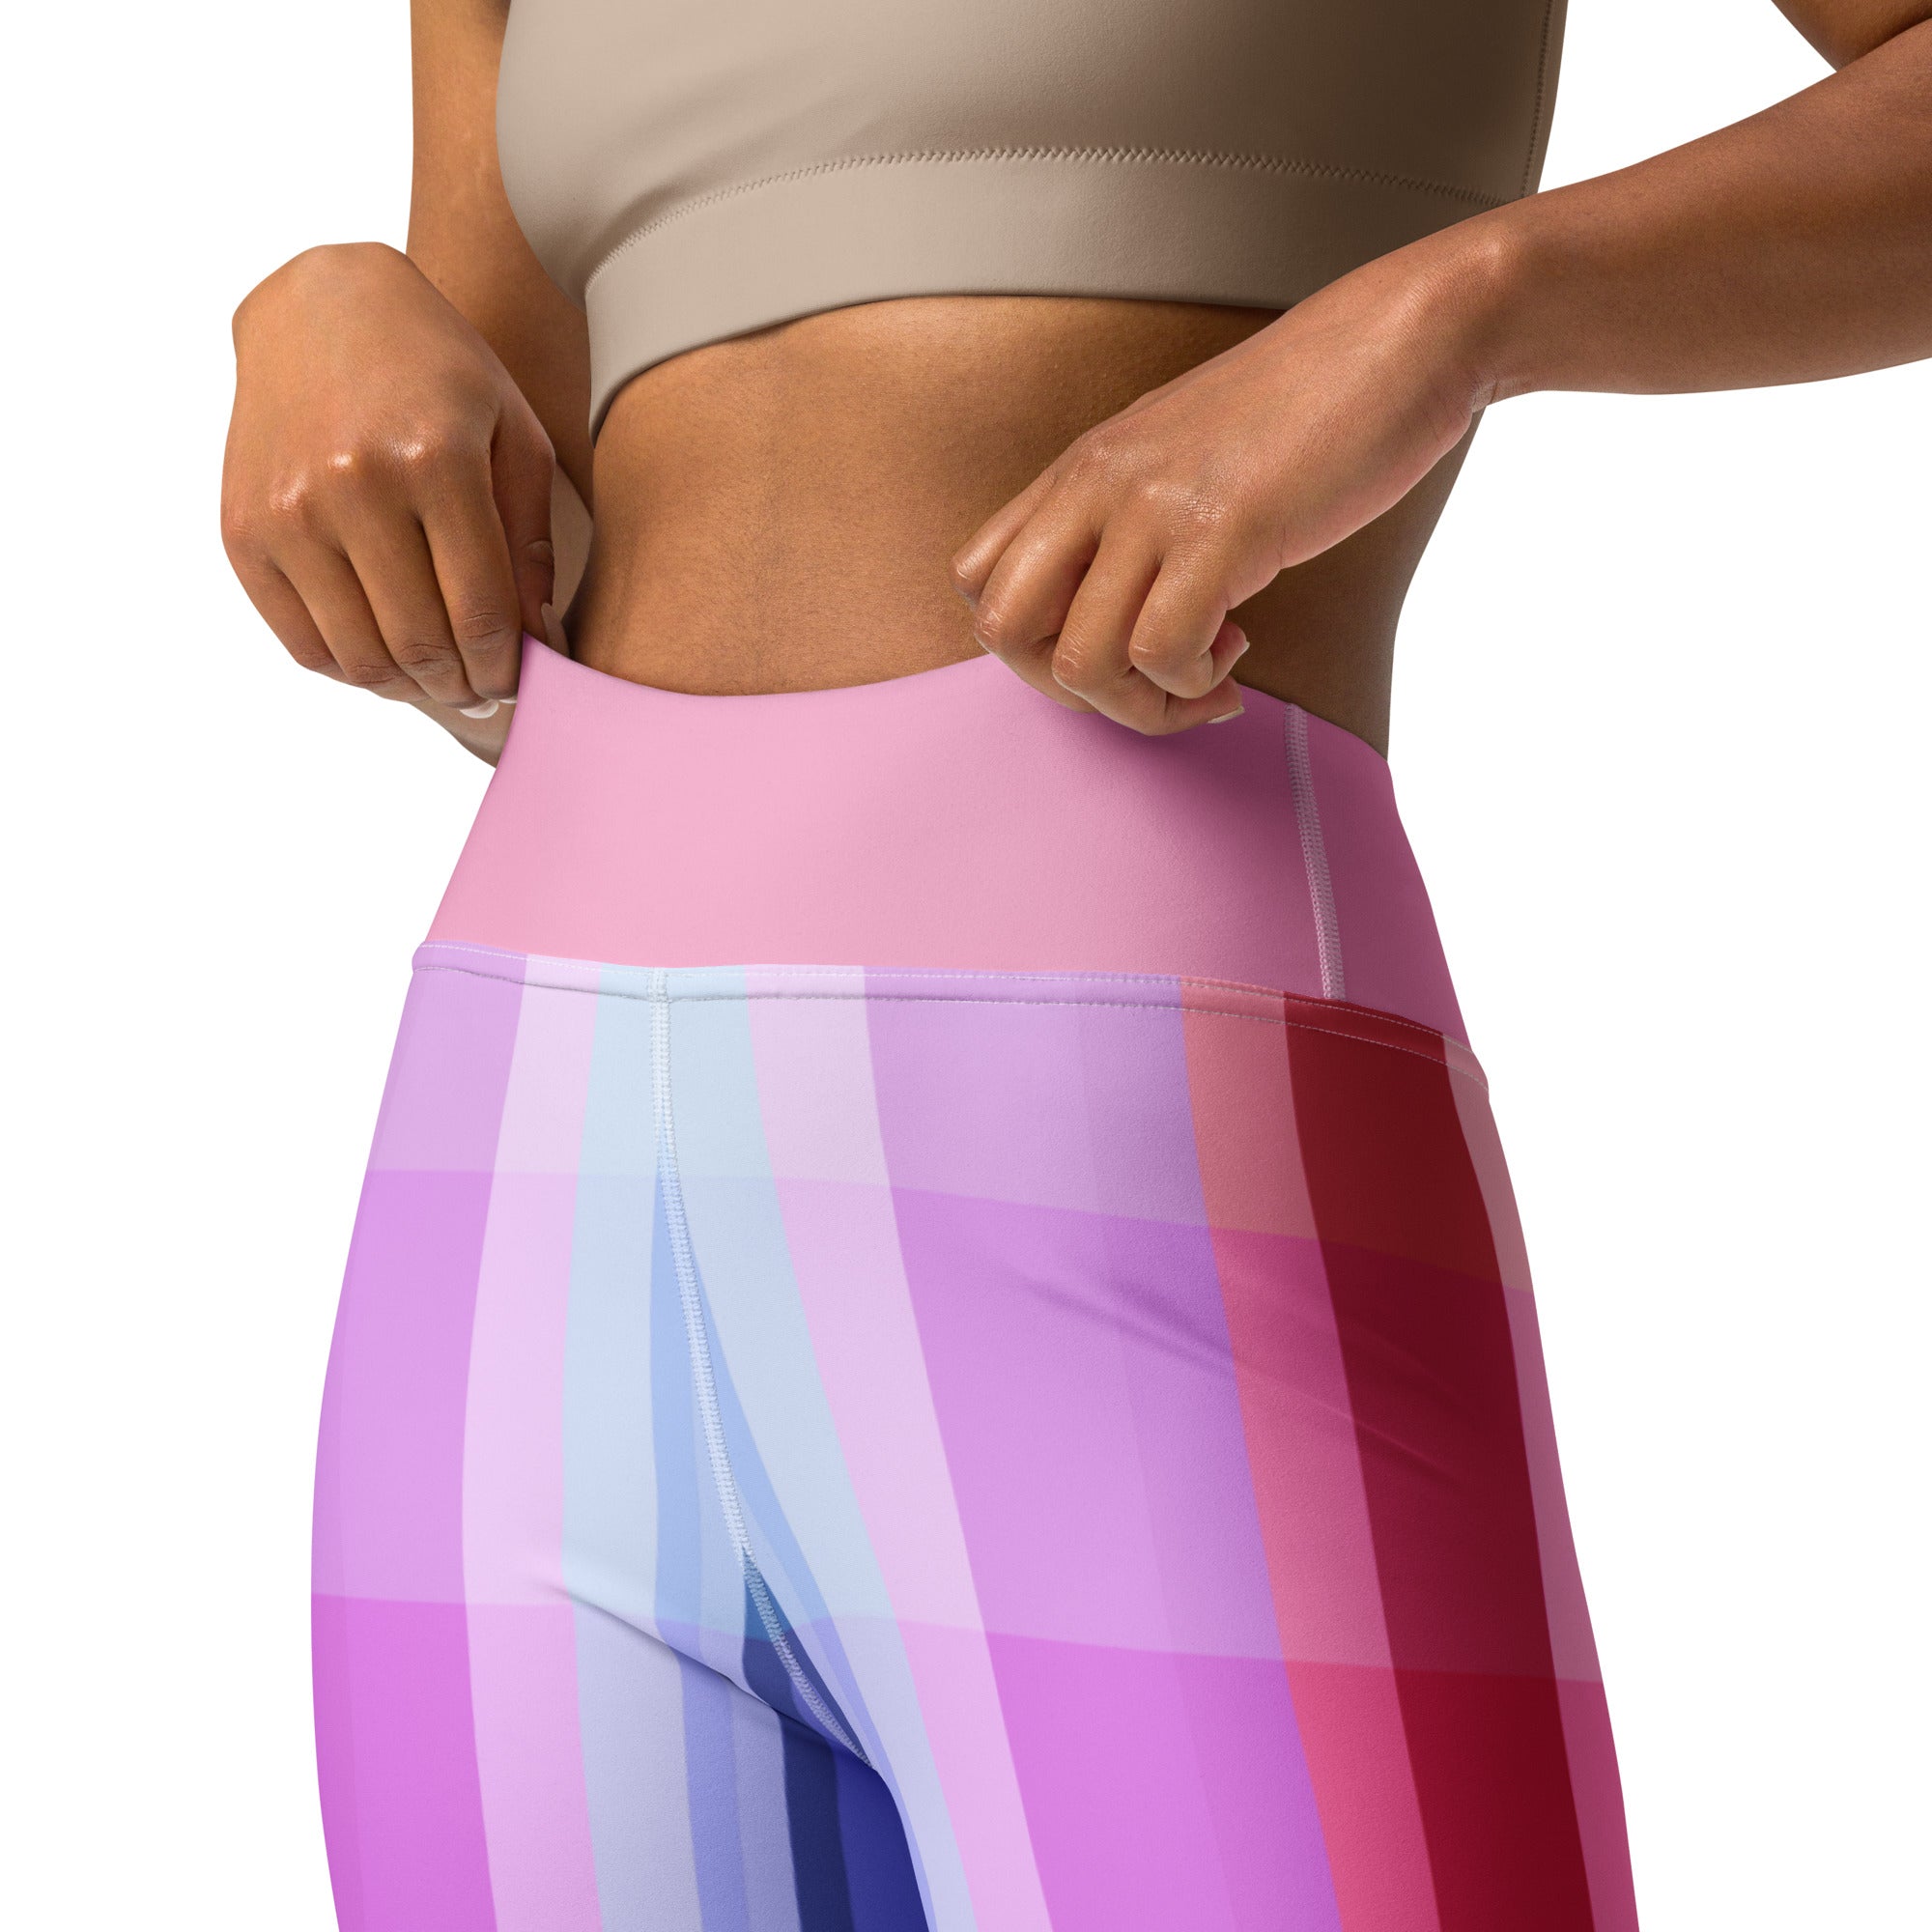 Vibrant Kaleidoscope Vision Yoga Leggings with a dazzling array of colors for an inspired yoga session.